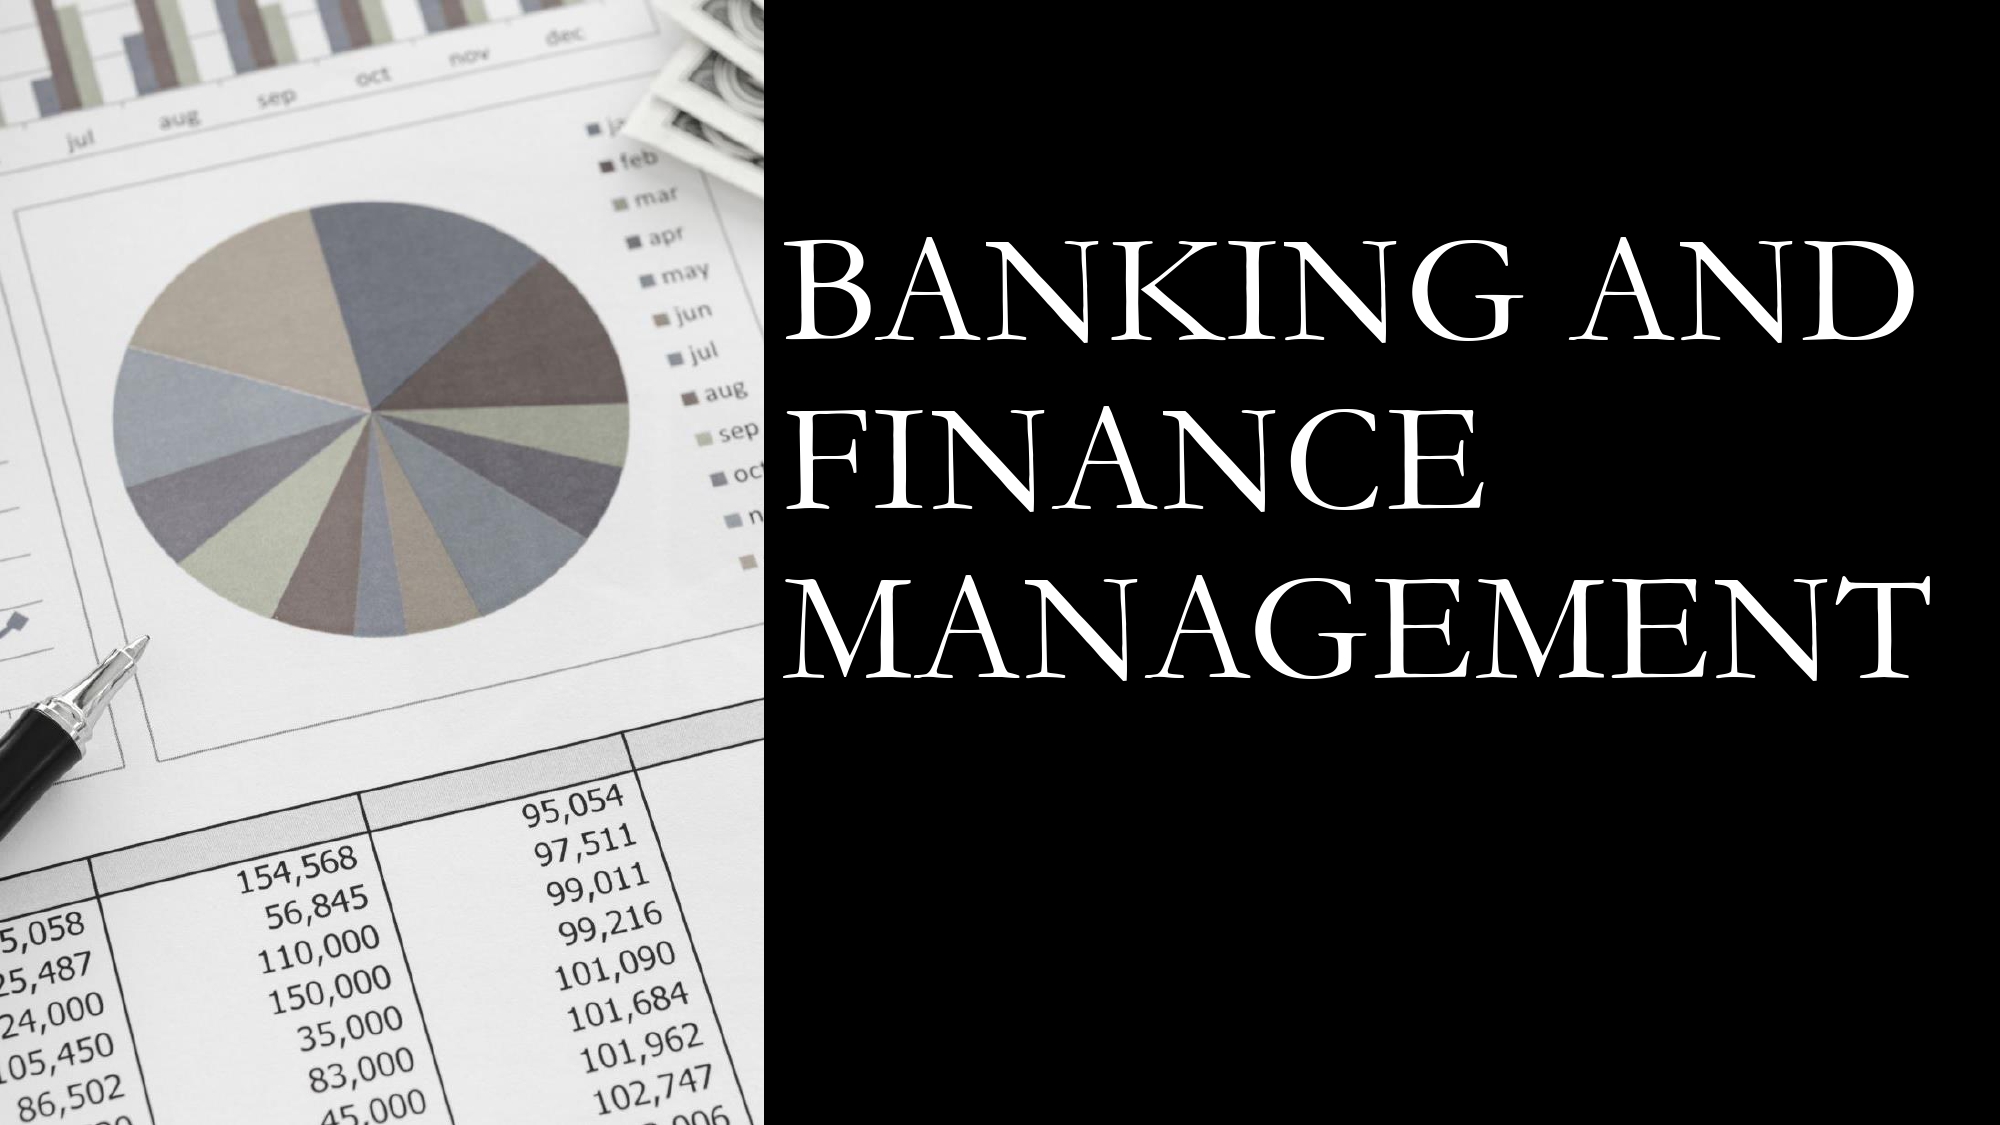 Banking and Finance management